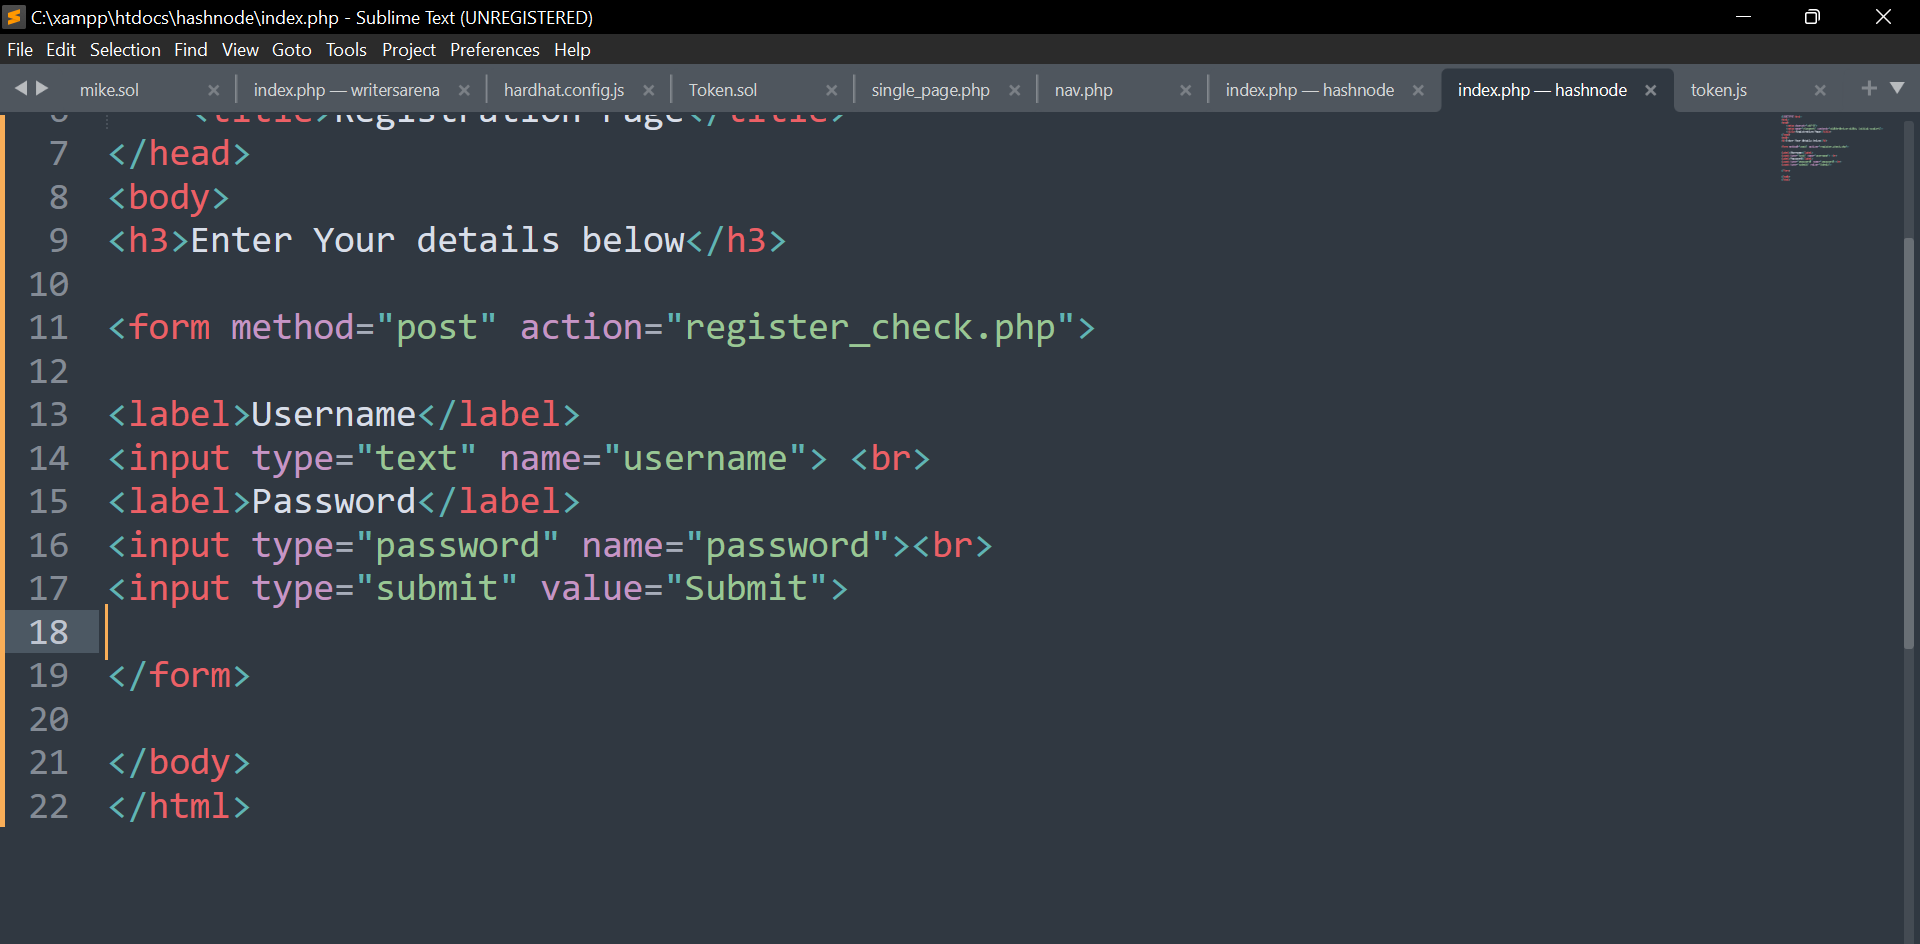 C__xampp_htdocs_hashnode_index.php  - Sublime Text (UNREGISTERED) 30-Sep-22 3_00_47 PM.png